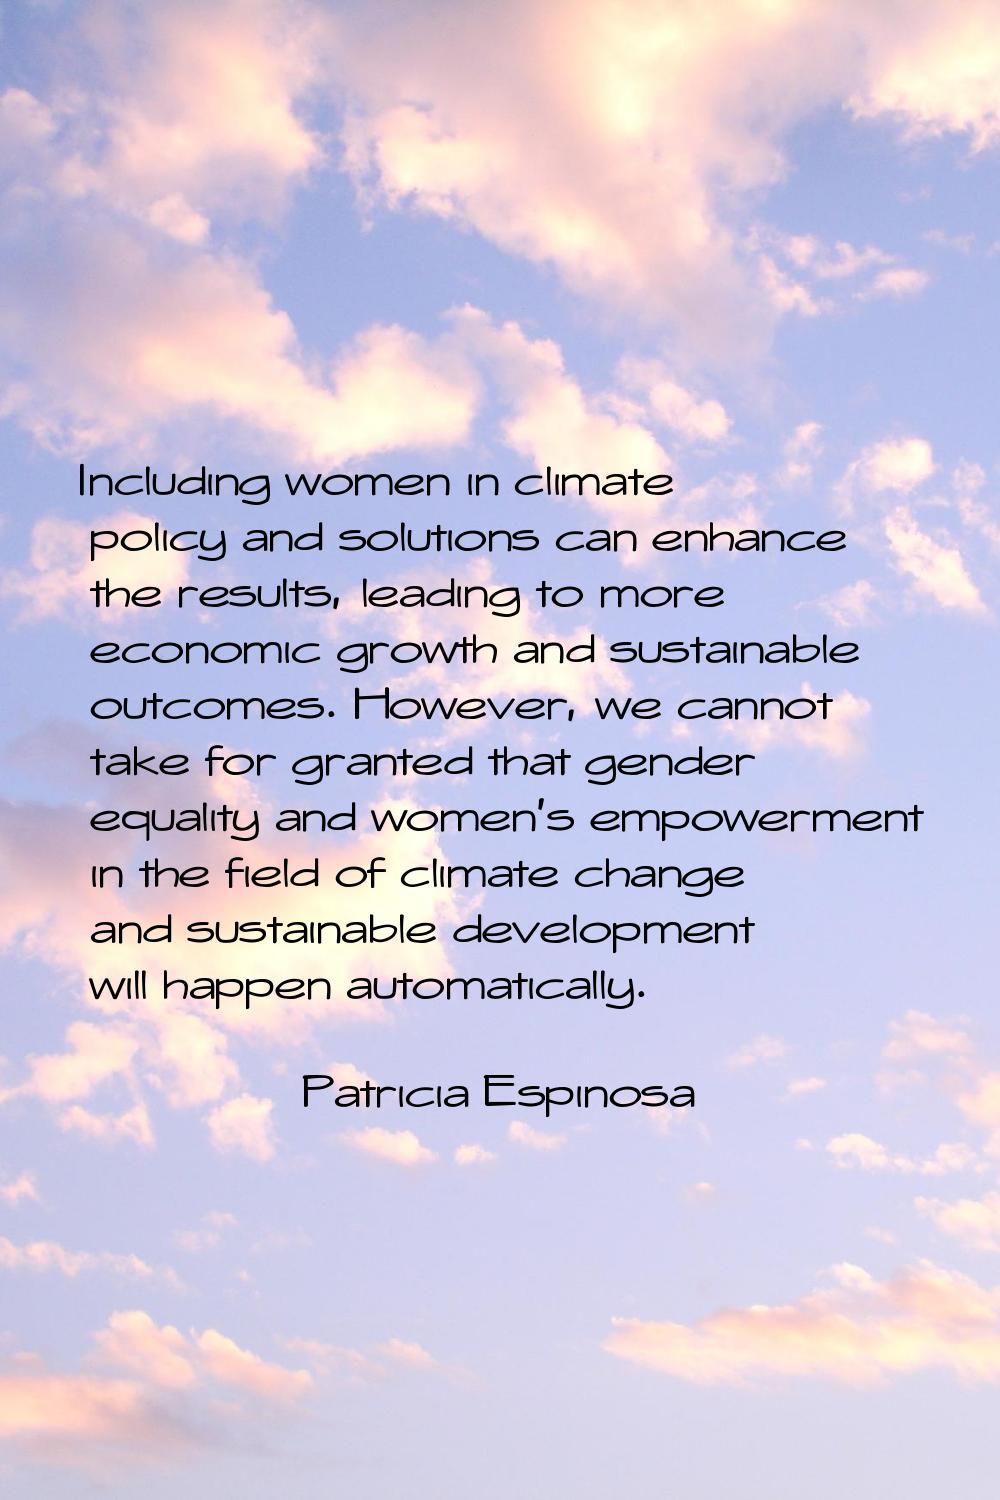 Including women in climate policy and solutions can enhance the results, leading to more economic g